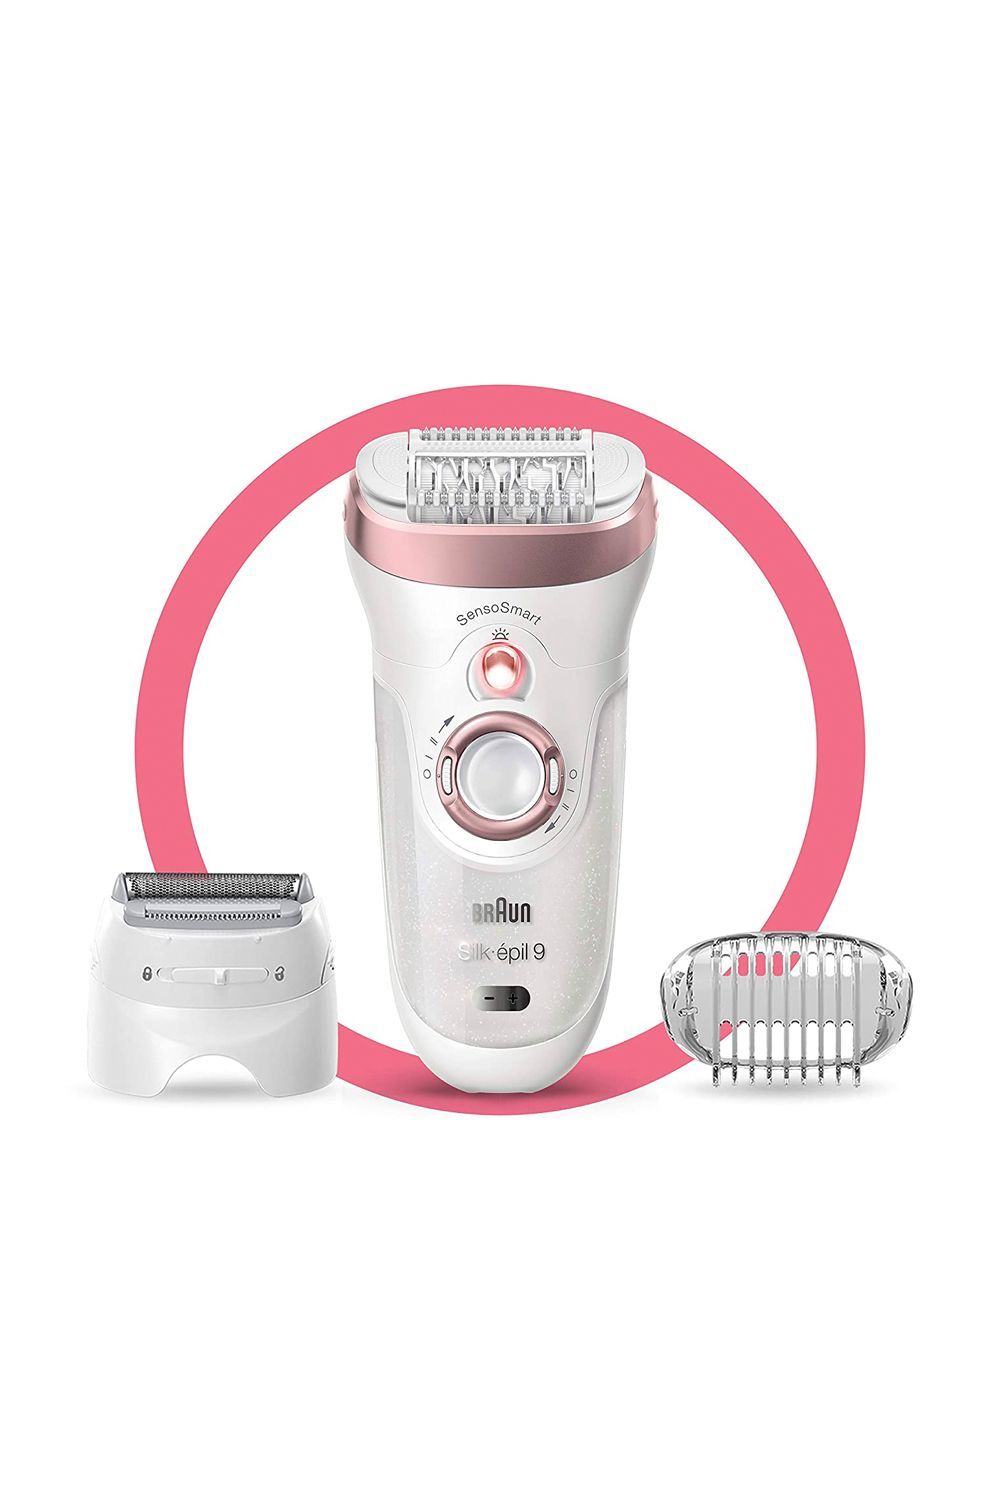 Habo by Ogawa At-Home IPL Hair Removal Device* [Apply Code: 6TT31]